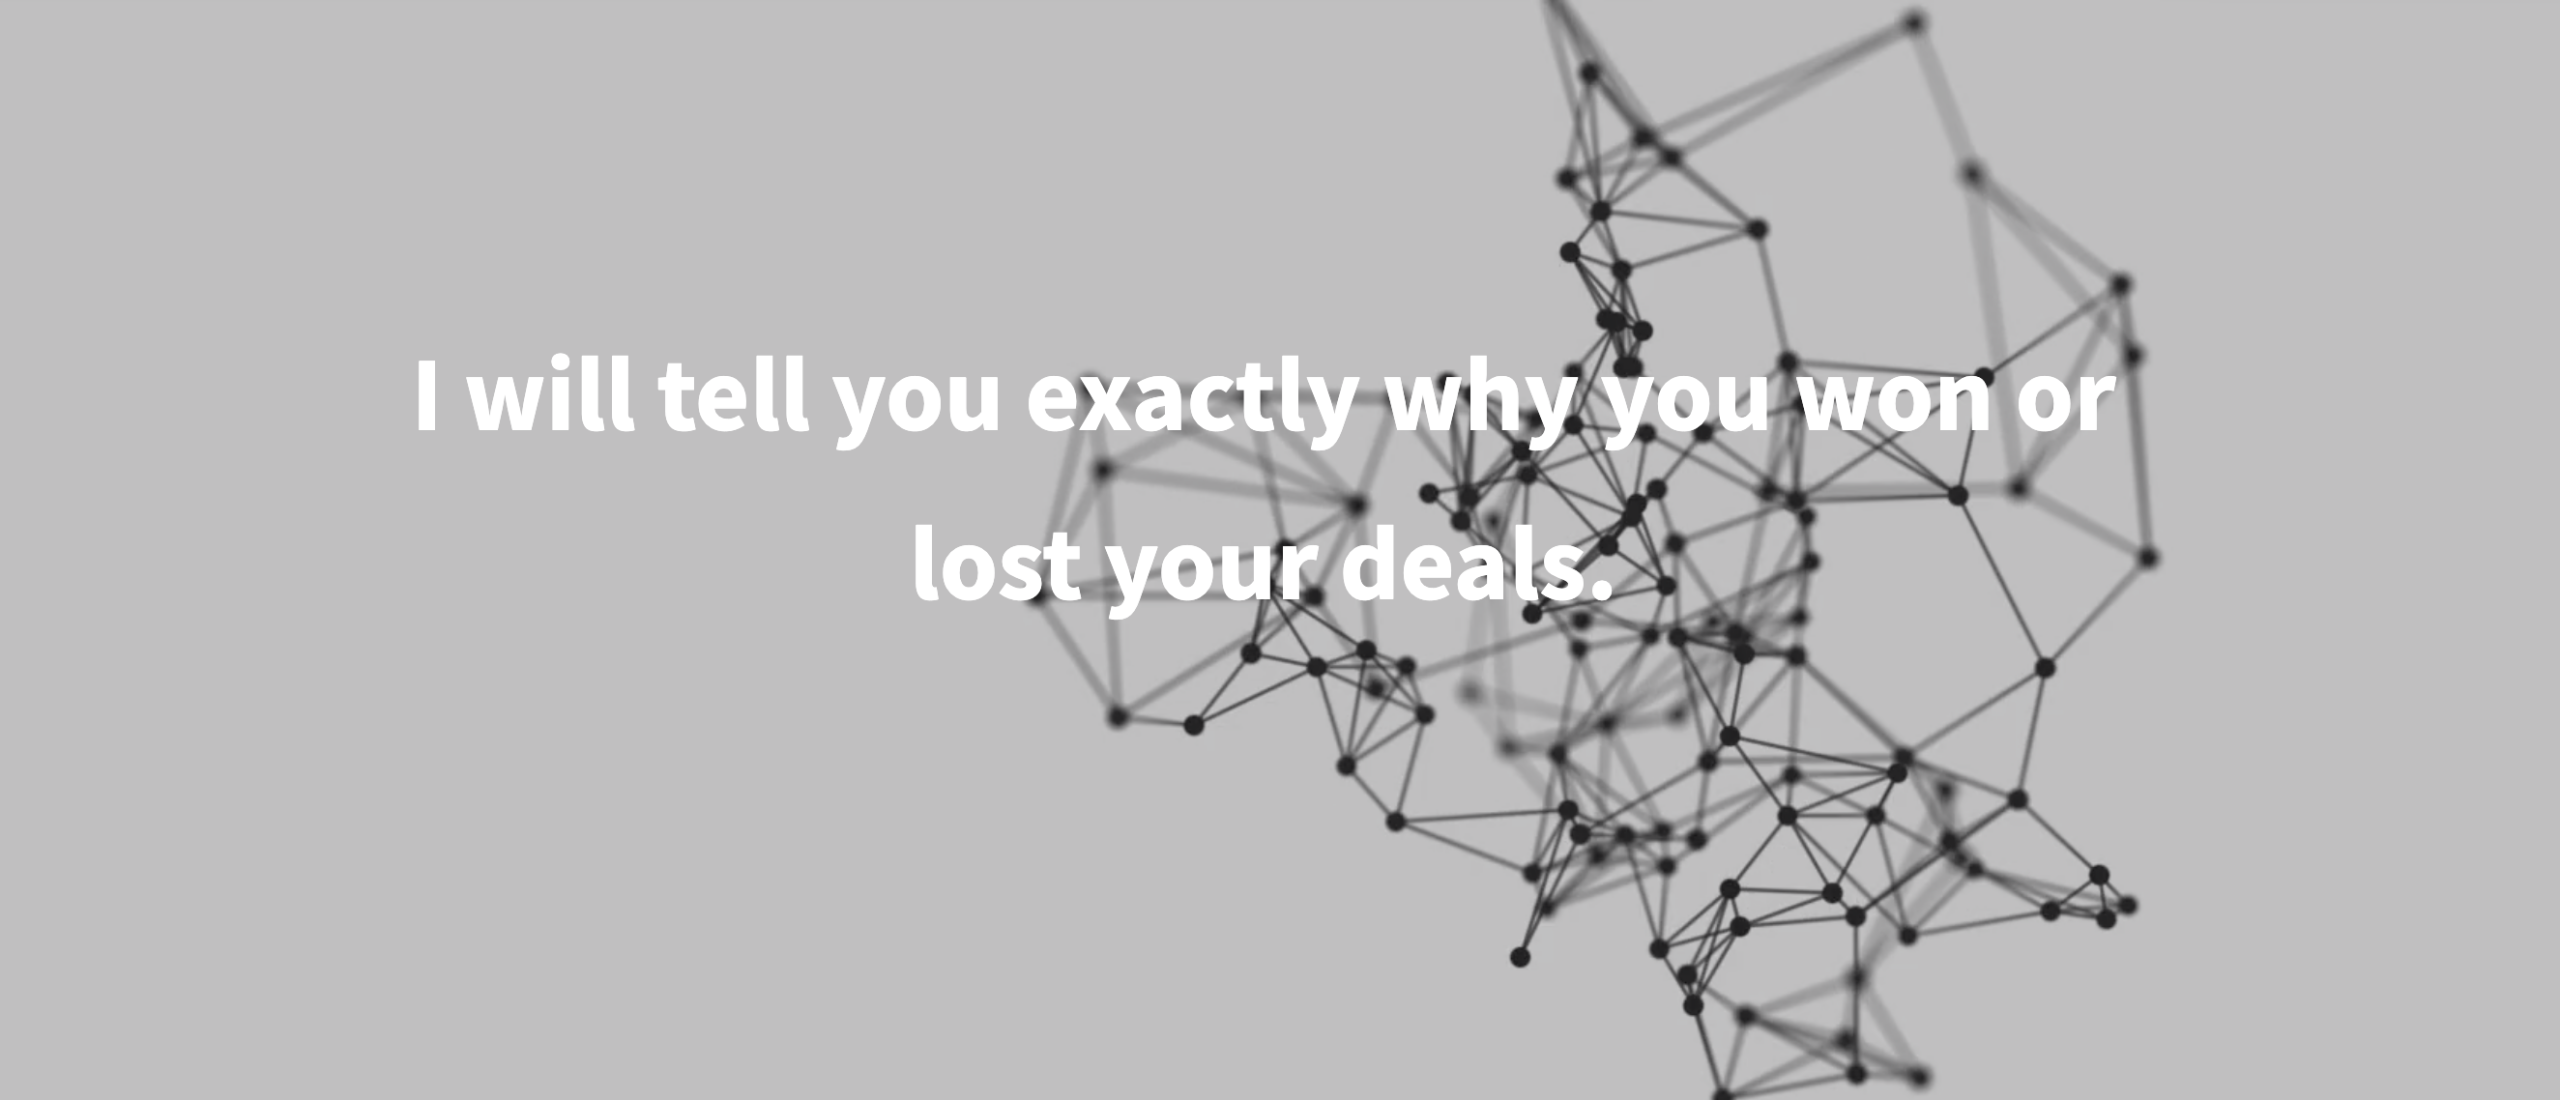 Maximizing Sales Effectiveness: The Power of AI-based Lost Deal Analysis